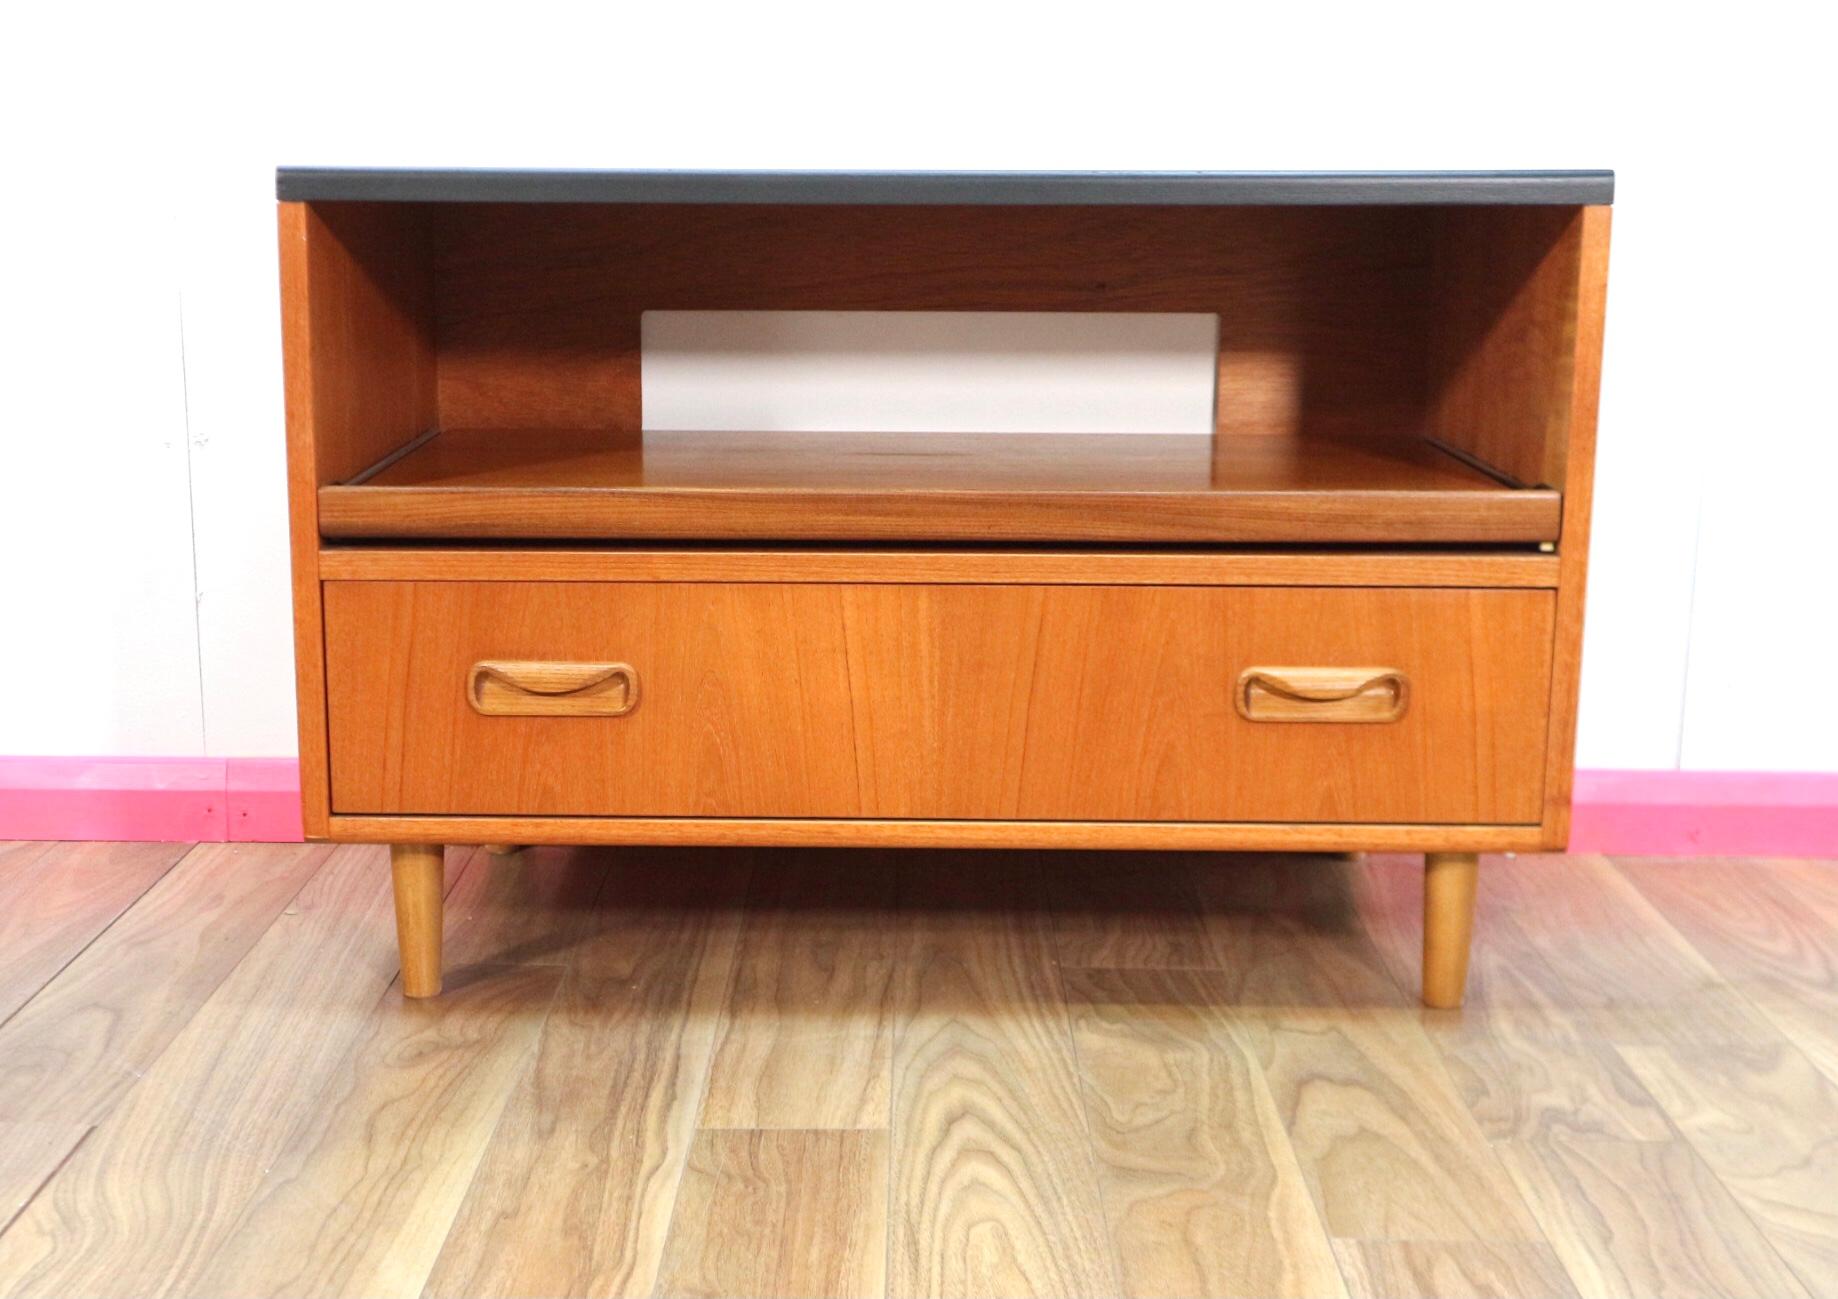 This superb tv unit by British maker, G Plan is a great focal point for any room. Featuring a useful slide out shelf and storage draw it can be used for a variety of uses. The top has been painted in black whichis not its original colour and sealed.